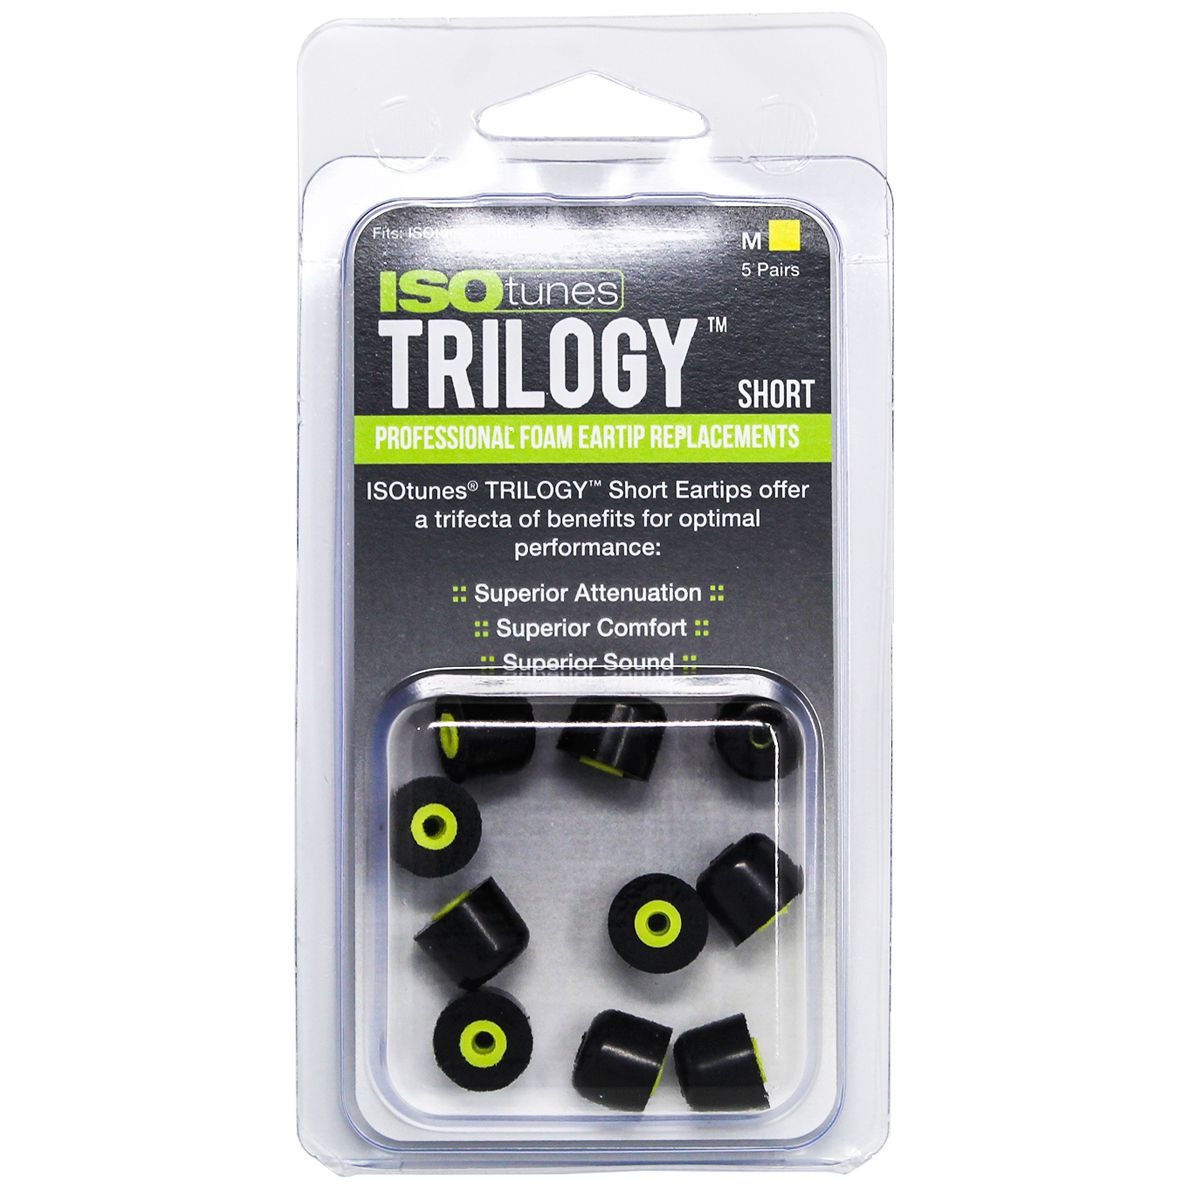 ISOtunes Trilogy Ear Tips - 5 pairs of replacement ear tips - for all ISOtunes headsets except original (IT-00) - Short/M